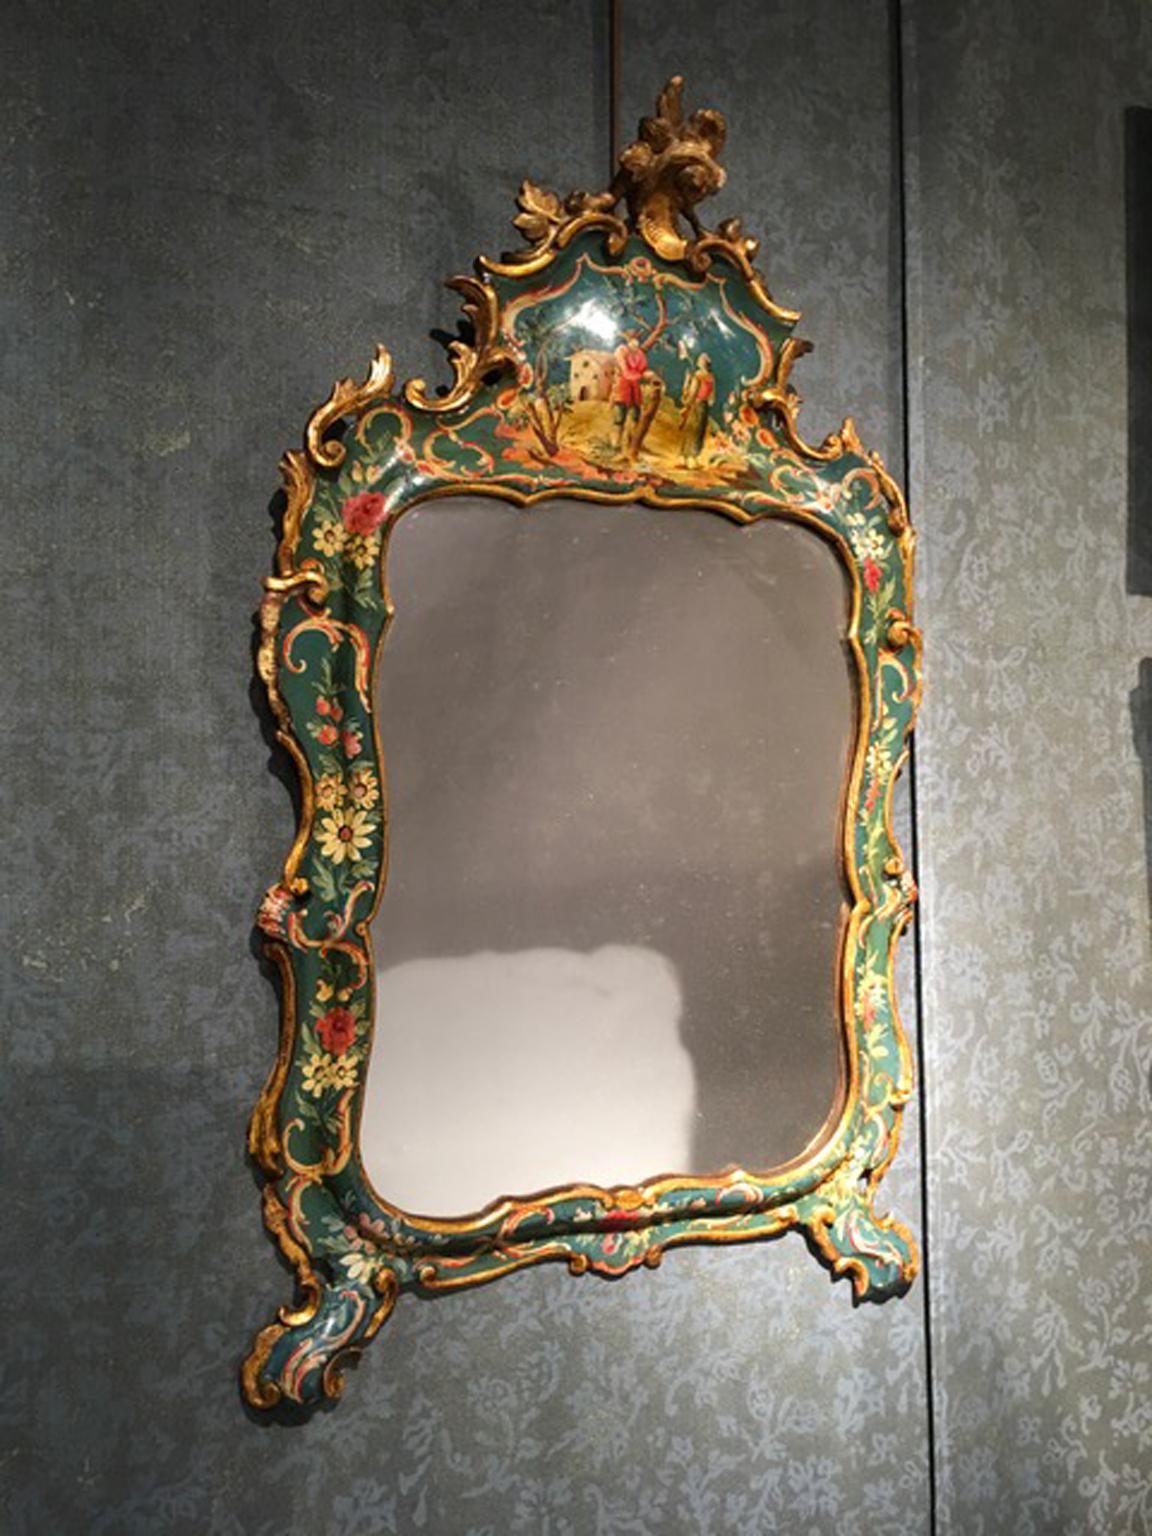 This is a very fine baroque handmade wooden mirror, with the original mercury glass. The wooden frame is hand painted with country life drawings on green, with a golden edge.

A very decorative piece and a collectibles one.

Original in every